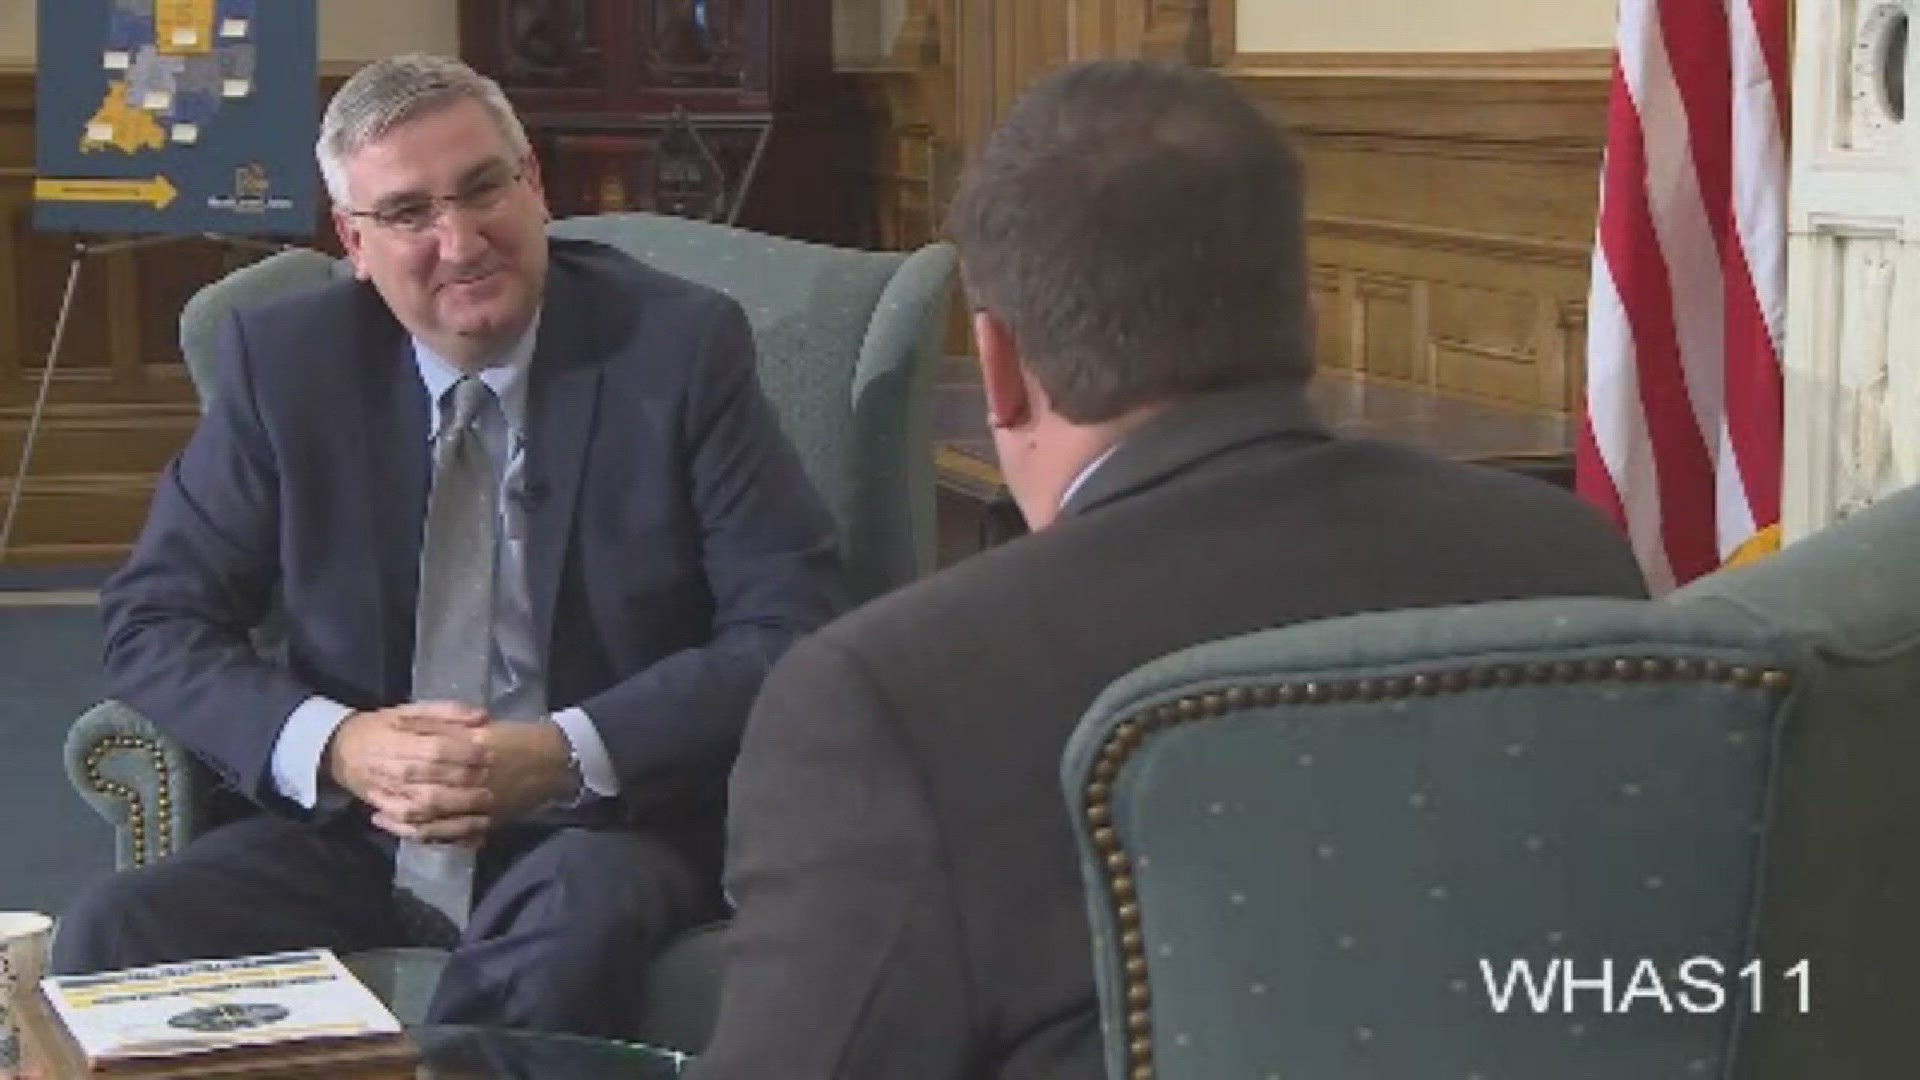 Political Editor Chris Williams asked Indiana Governor Eric Holcomb for his take on the successes, failures of his 1st year in office. The interview revealed the Republican feels facing the drug epidemic will be one of the biggest challenges of 2018.